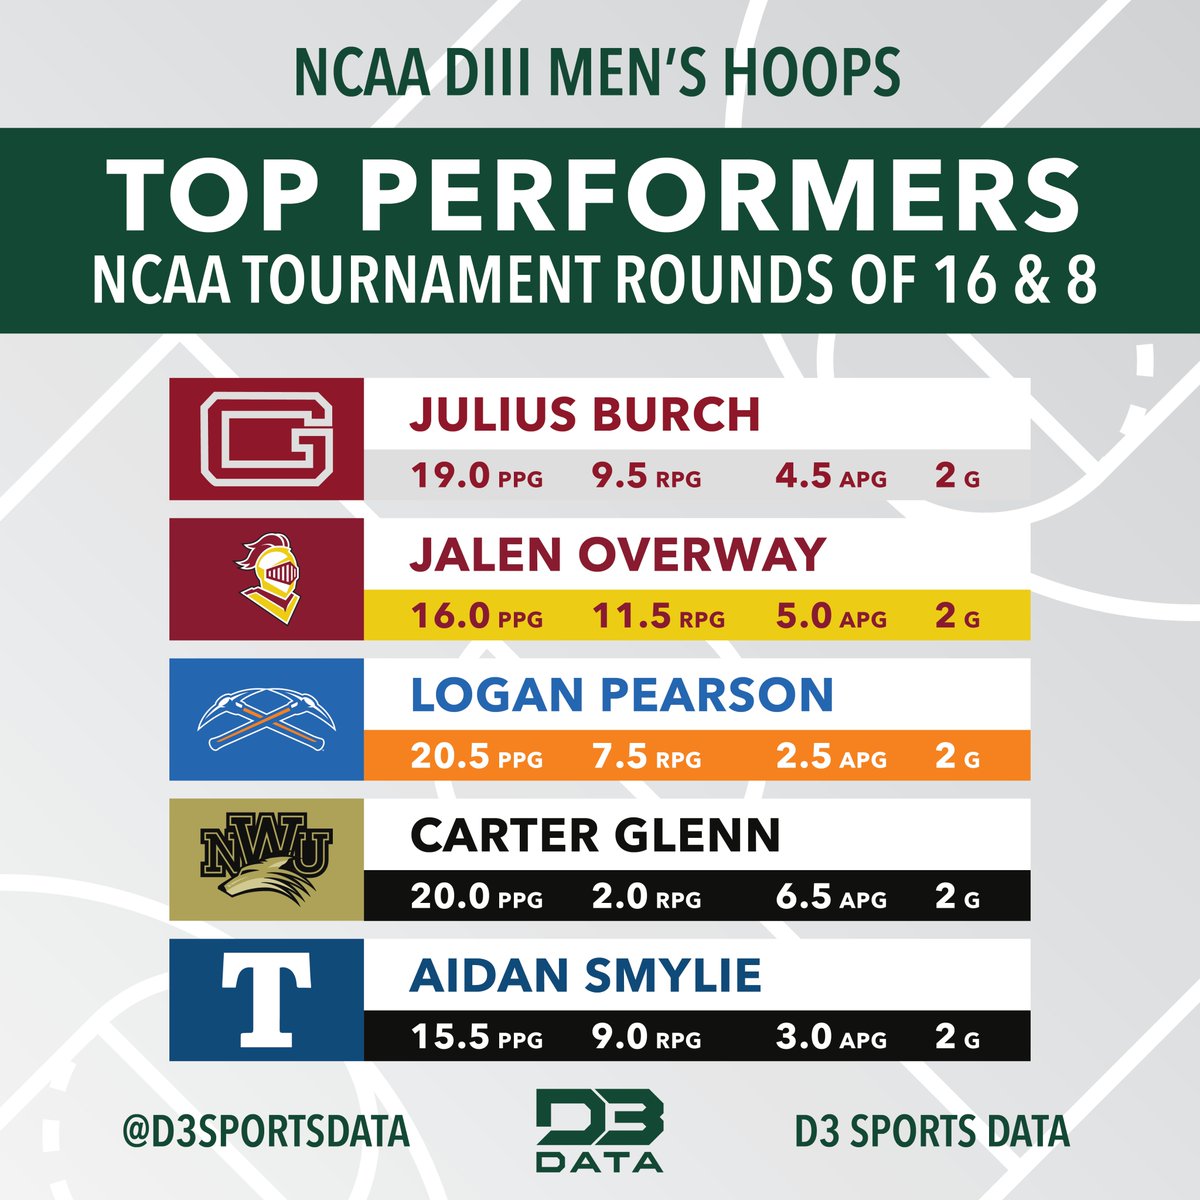 Top players from the NCAA Men's Hoops Tournament rounds of 16 and 8. #d3data #d3 #d3sports #d3hoops